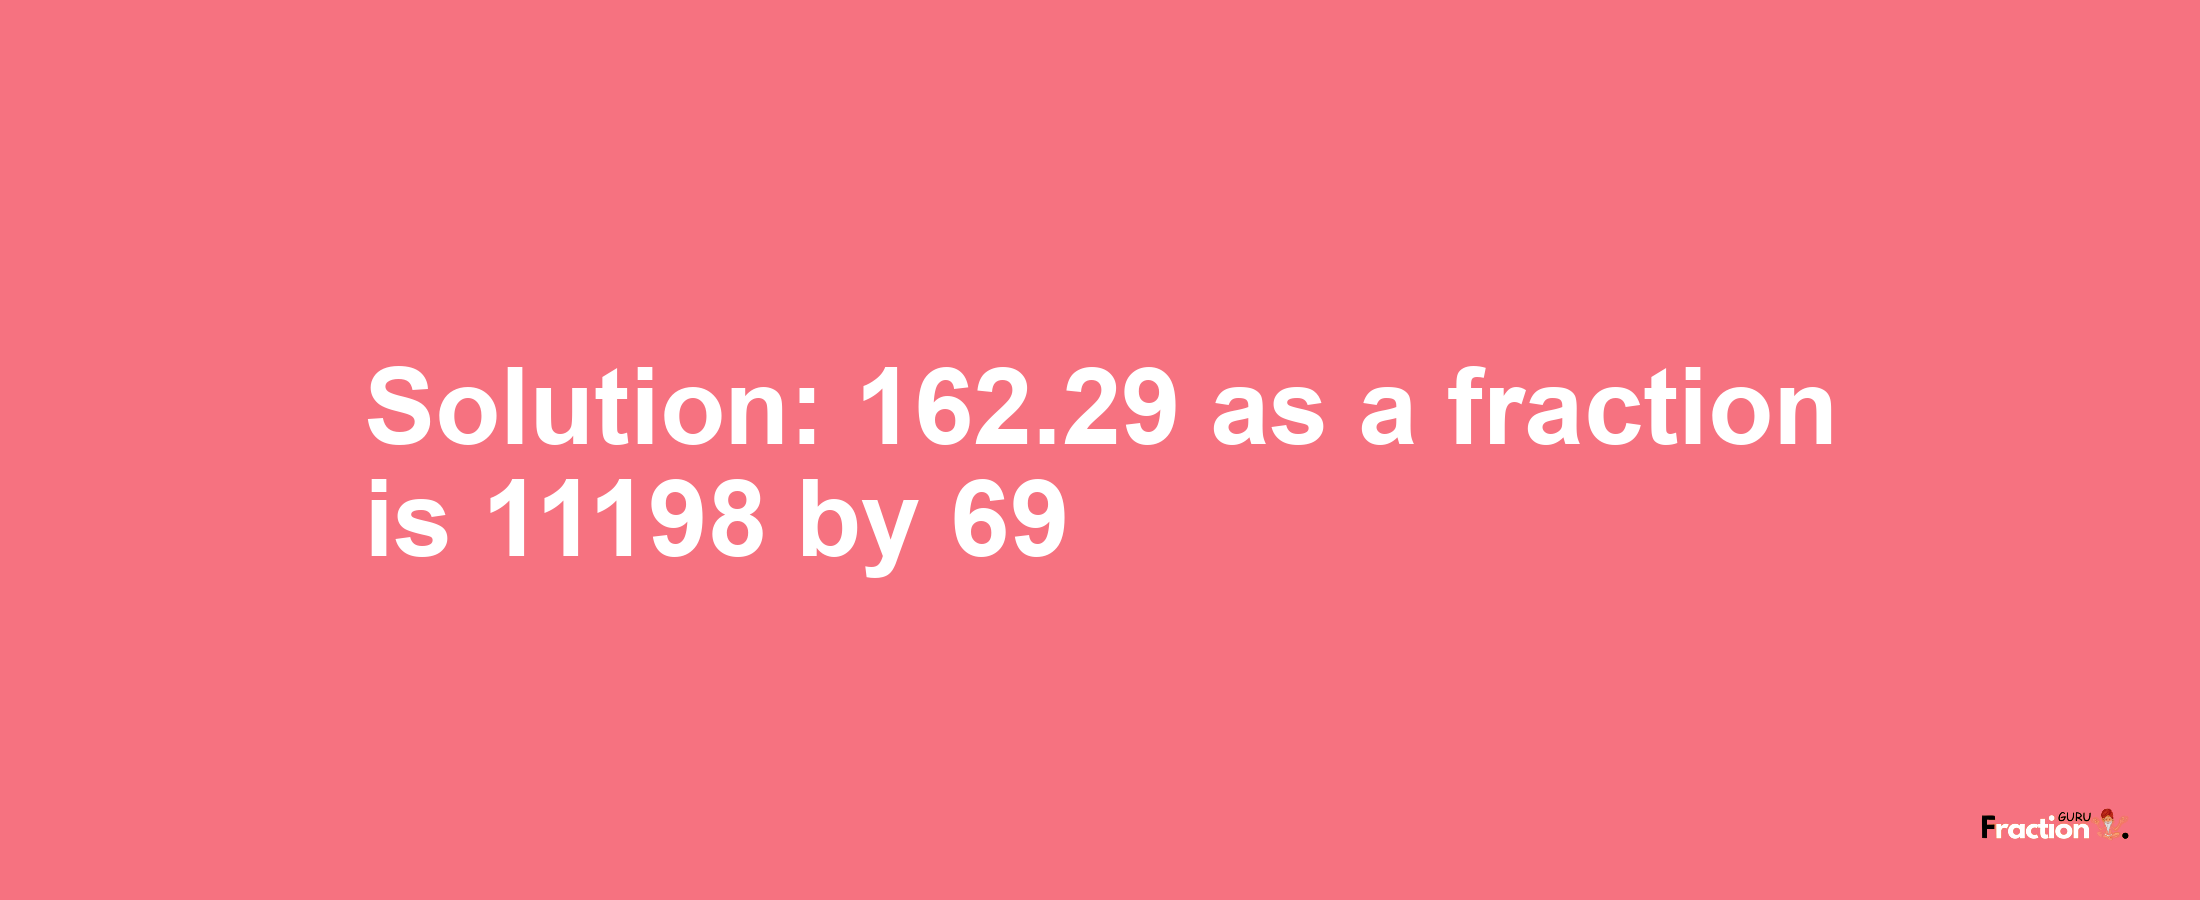 Solution:162.29 as a fraction is 11198/69